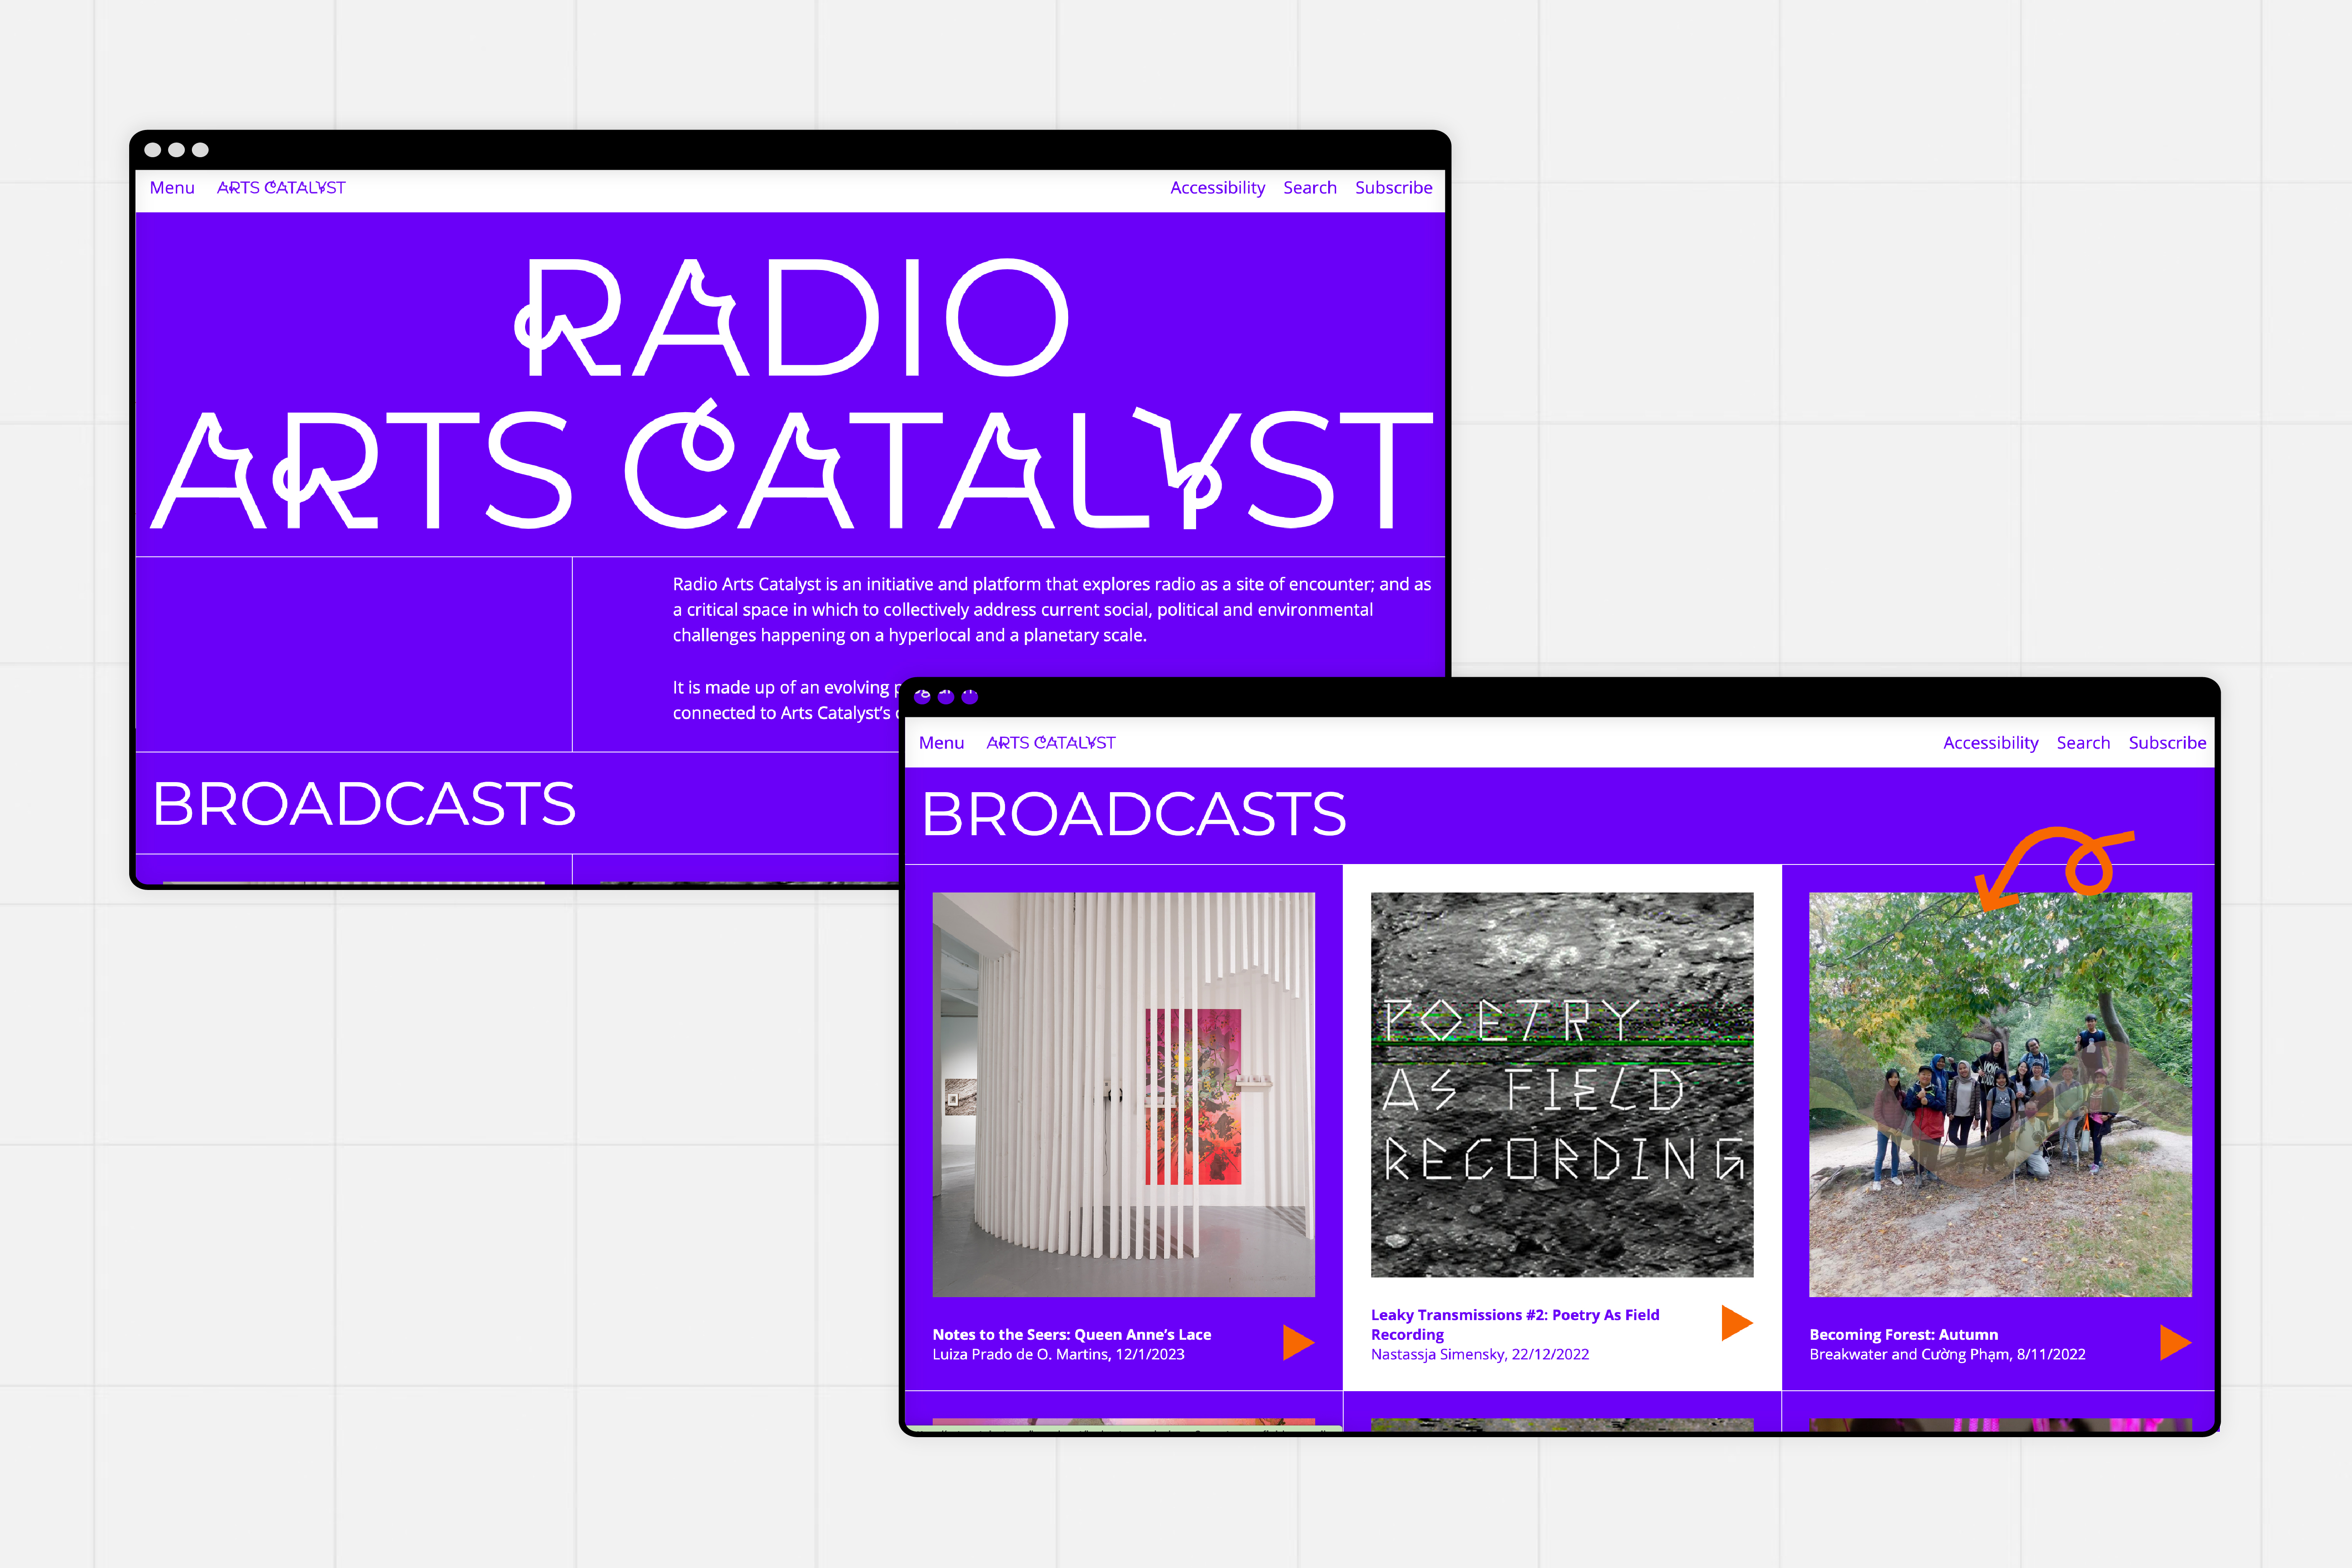 Two desktop on screen both showing the arts catalyst website, one shows the Radio Arts Catalyst Website page and the other shows the selections of broadcasts available to listen to